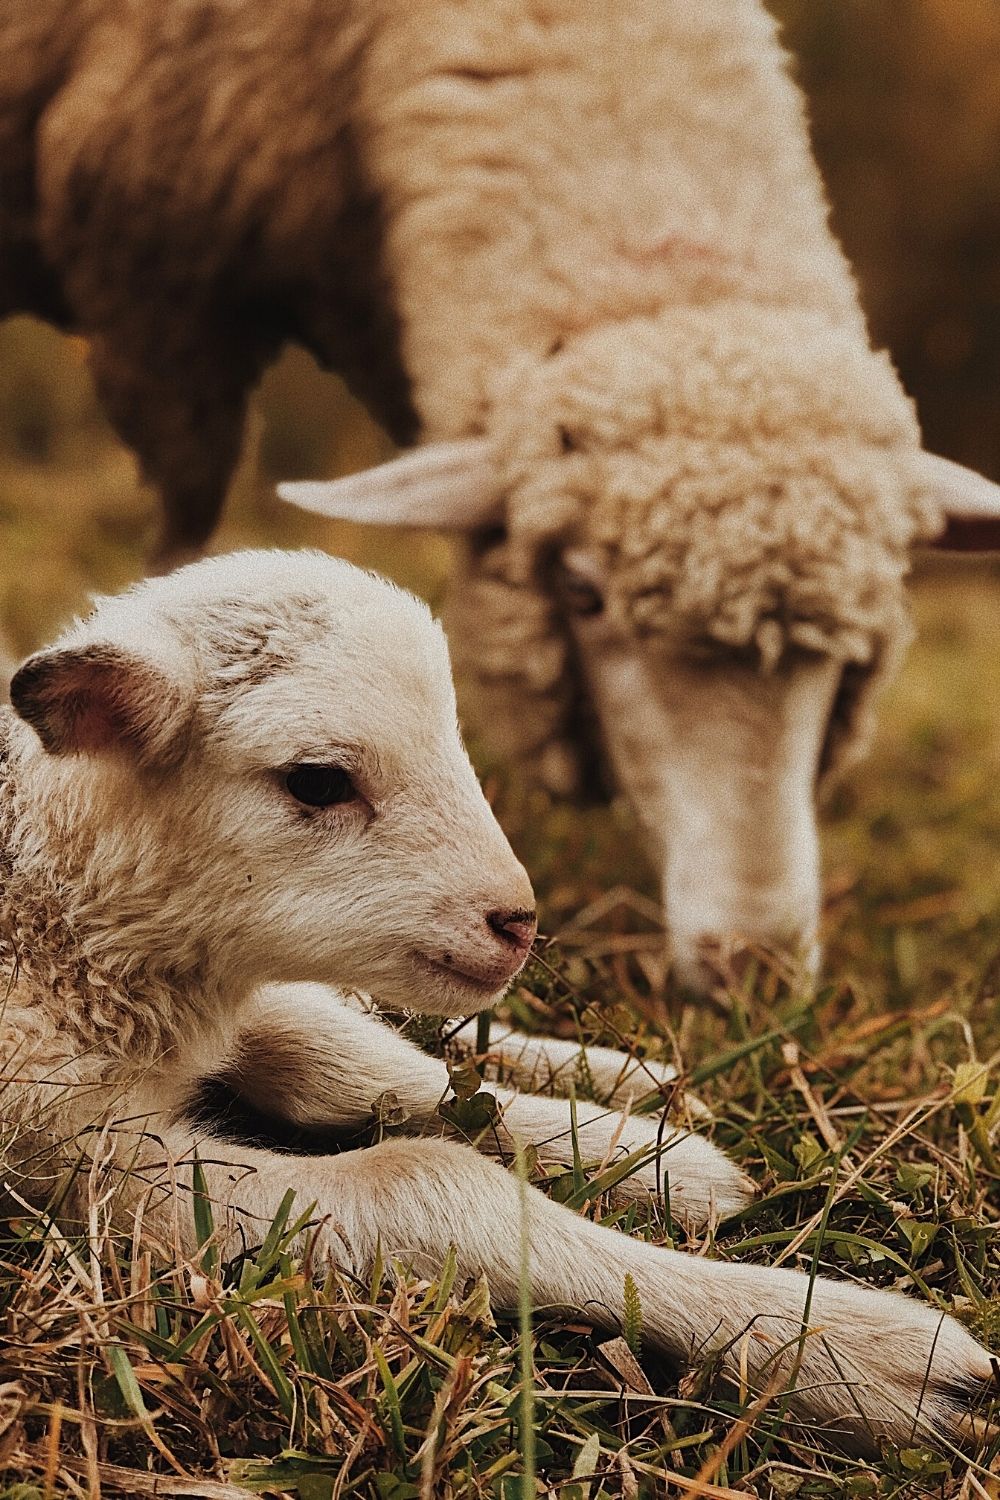 Make sure an orphaned baby lamb has a proper shelter to keep it protected from the elements and keep it warm